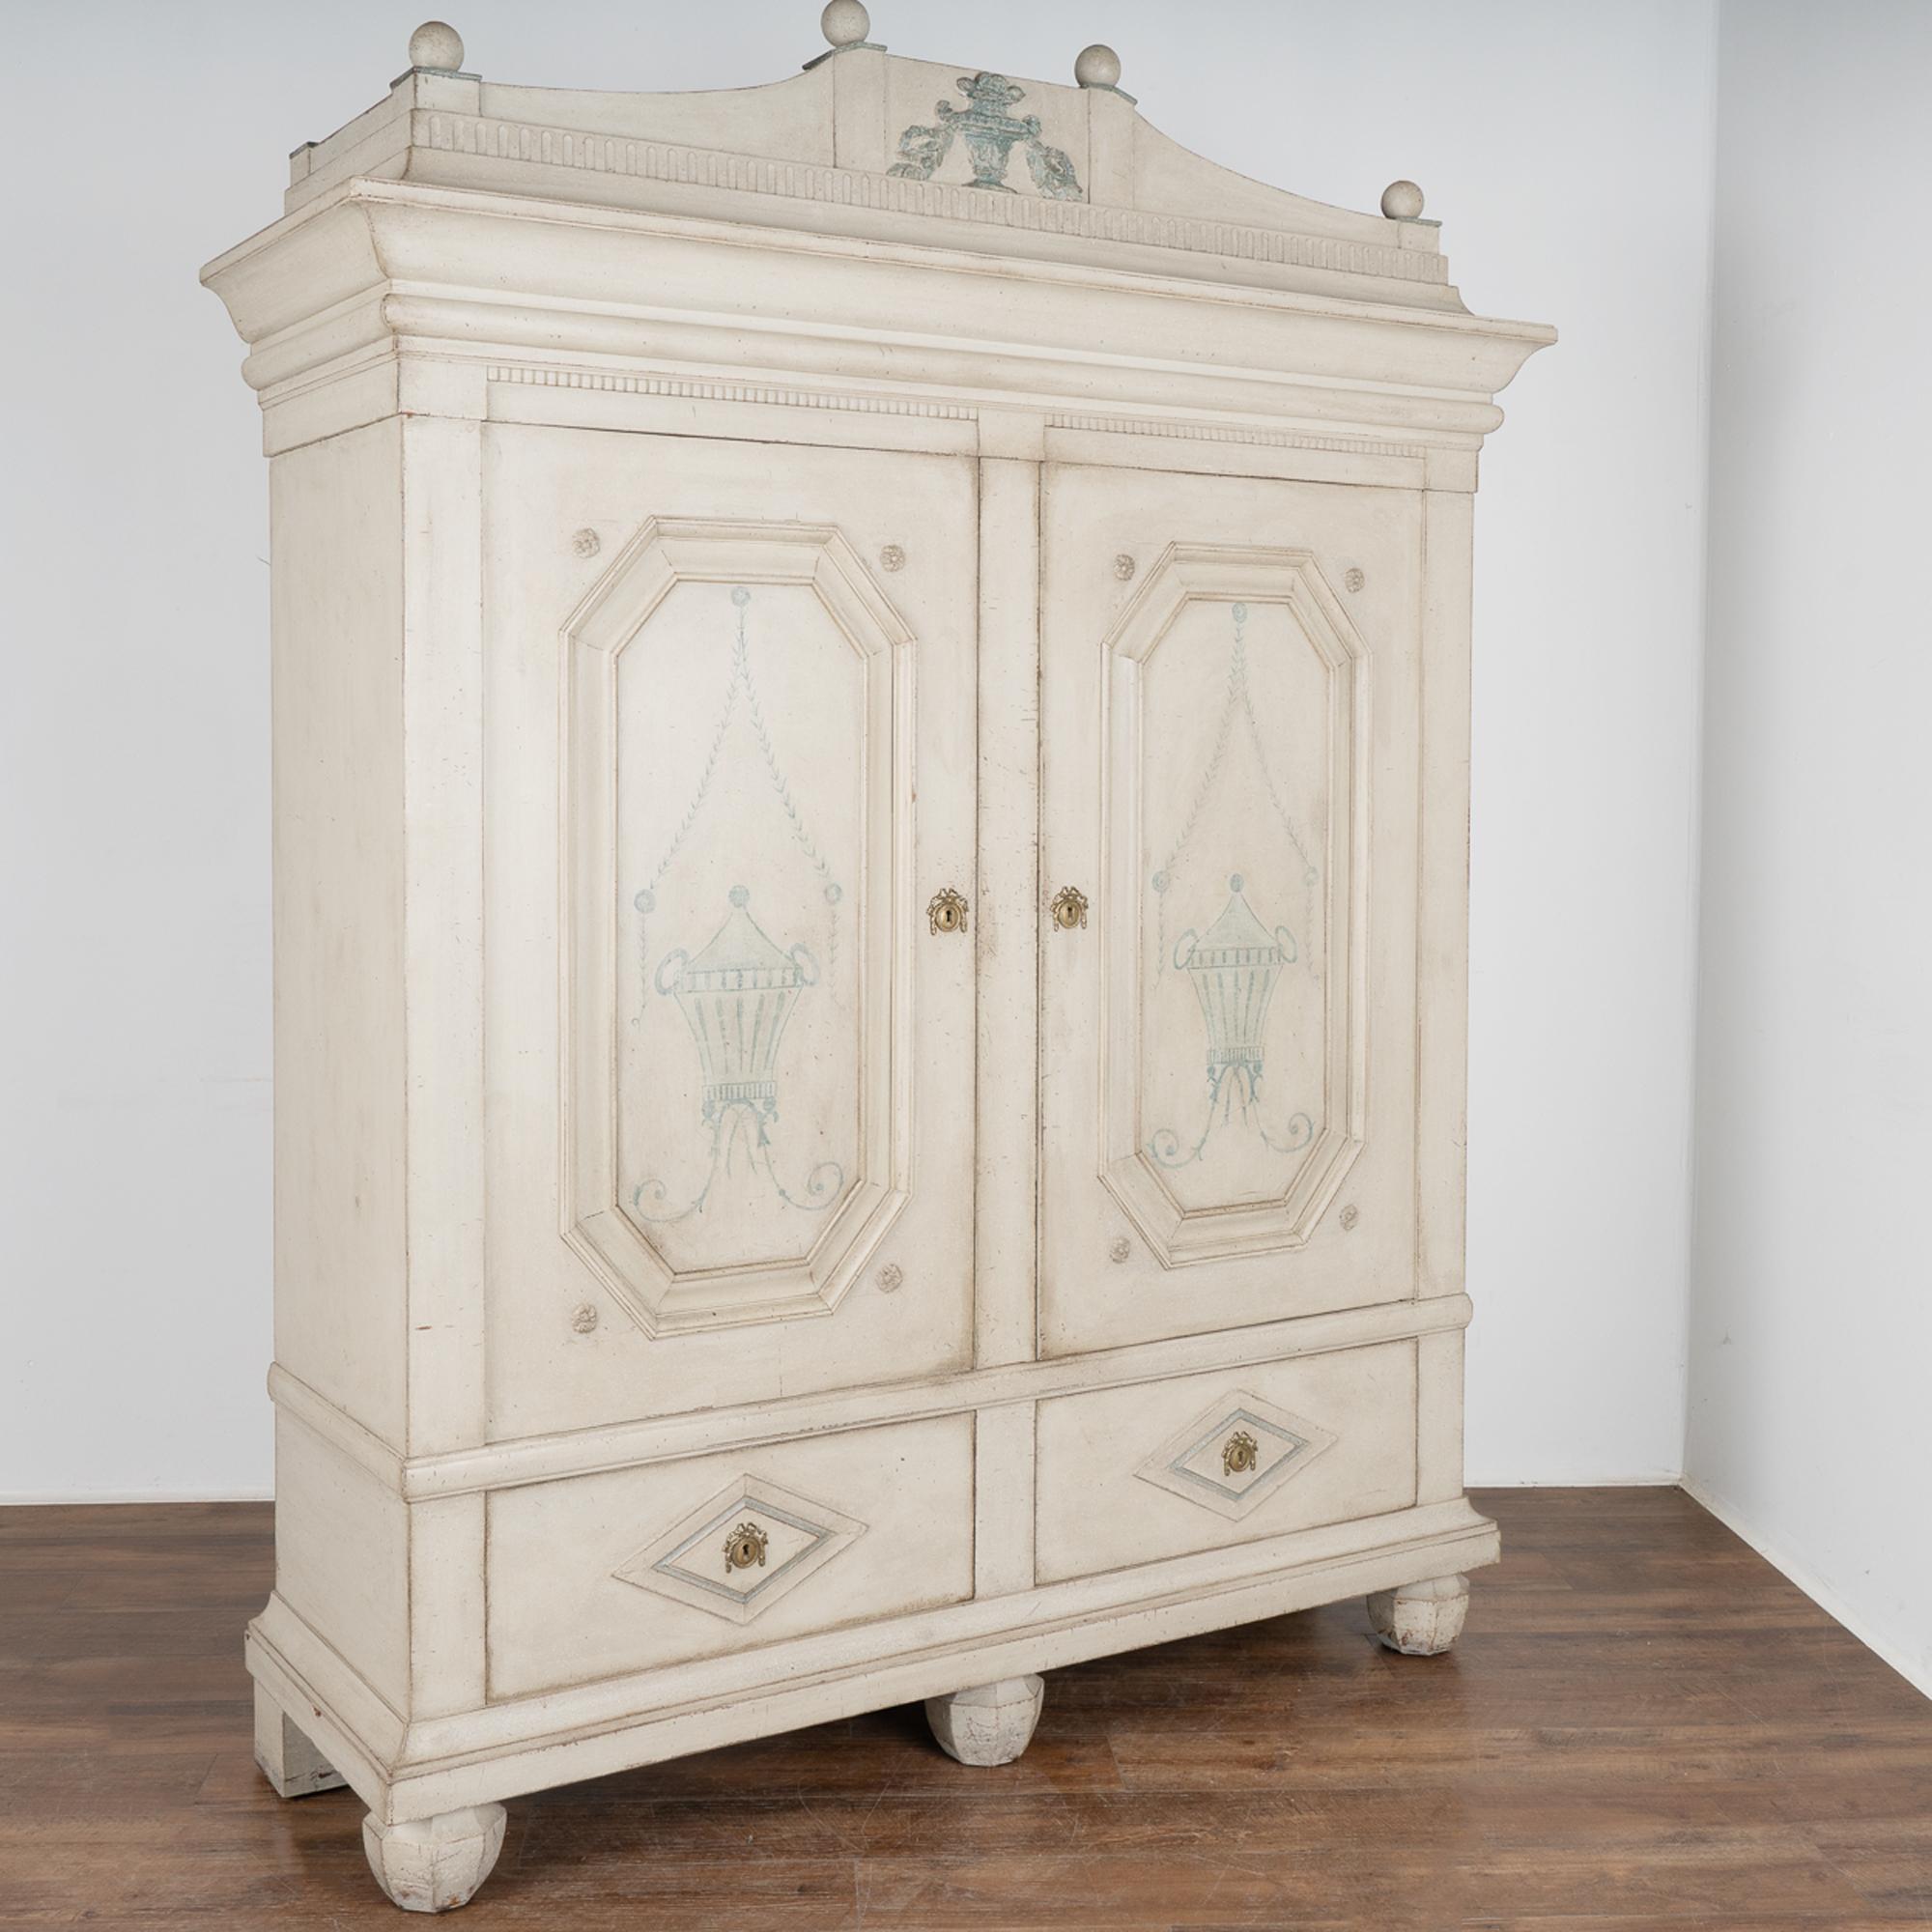 Statuesque gray armoire with beautiful paneled doors, impressive raised crown with large round finials and raised on large carved feet.
This elegant armoire was crafted in the mid 1800's and given a newer painted finish and adjustable shelving